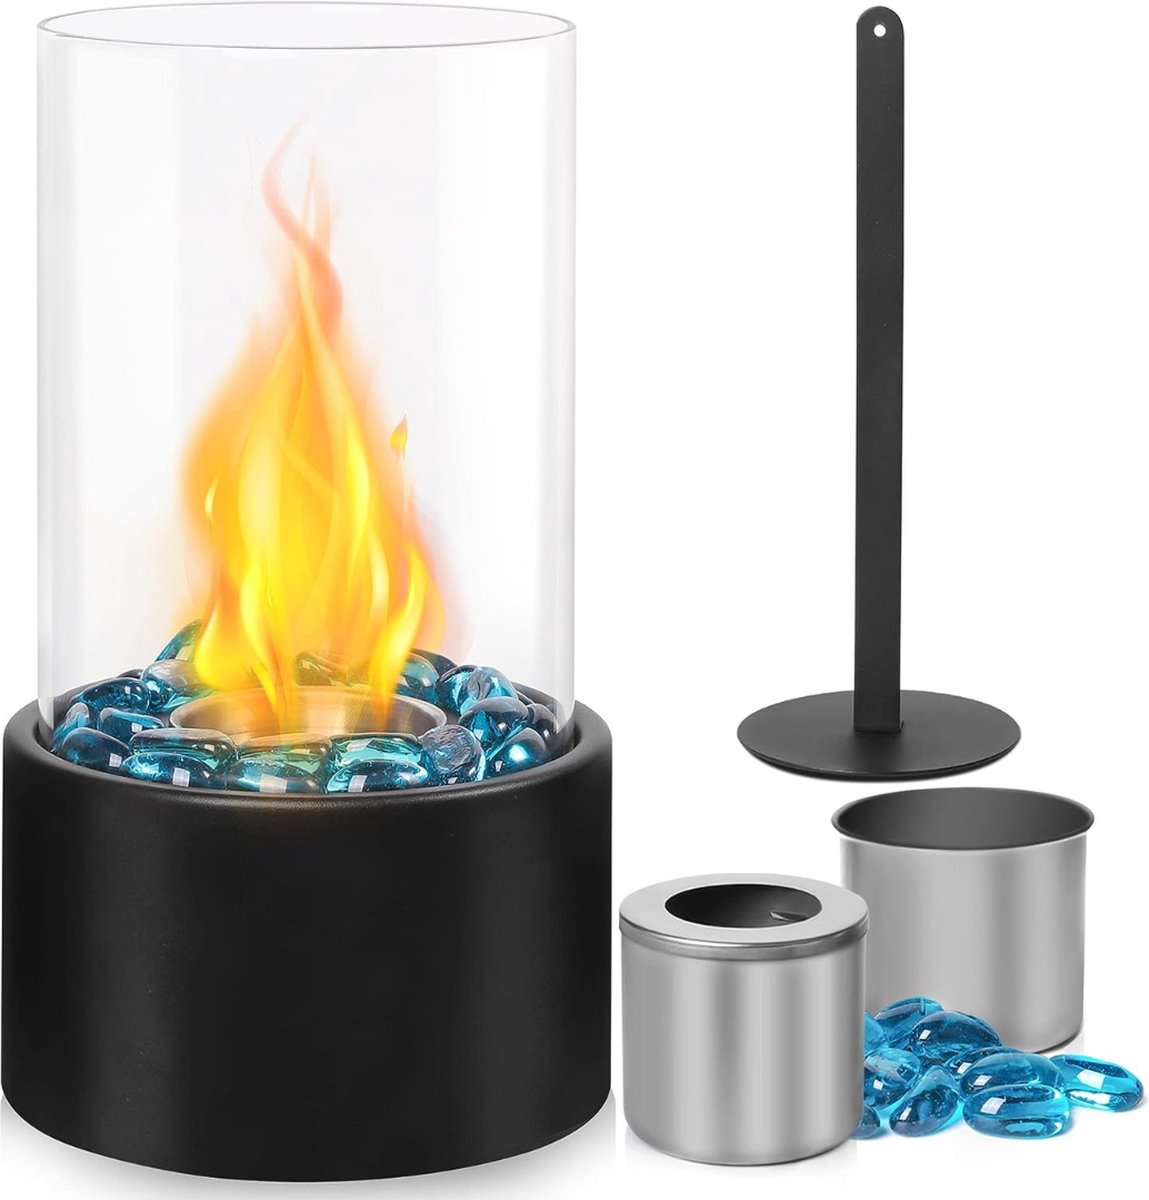 Eufrozy Table Fireplace - Portable Indoor Table Fire